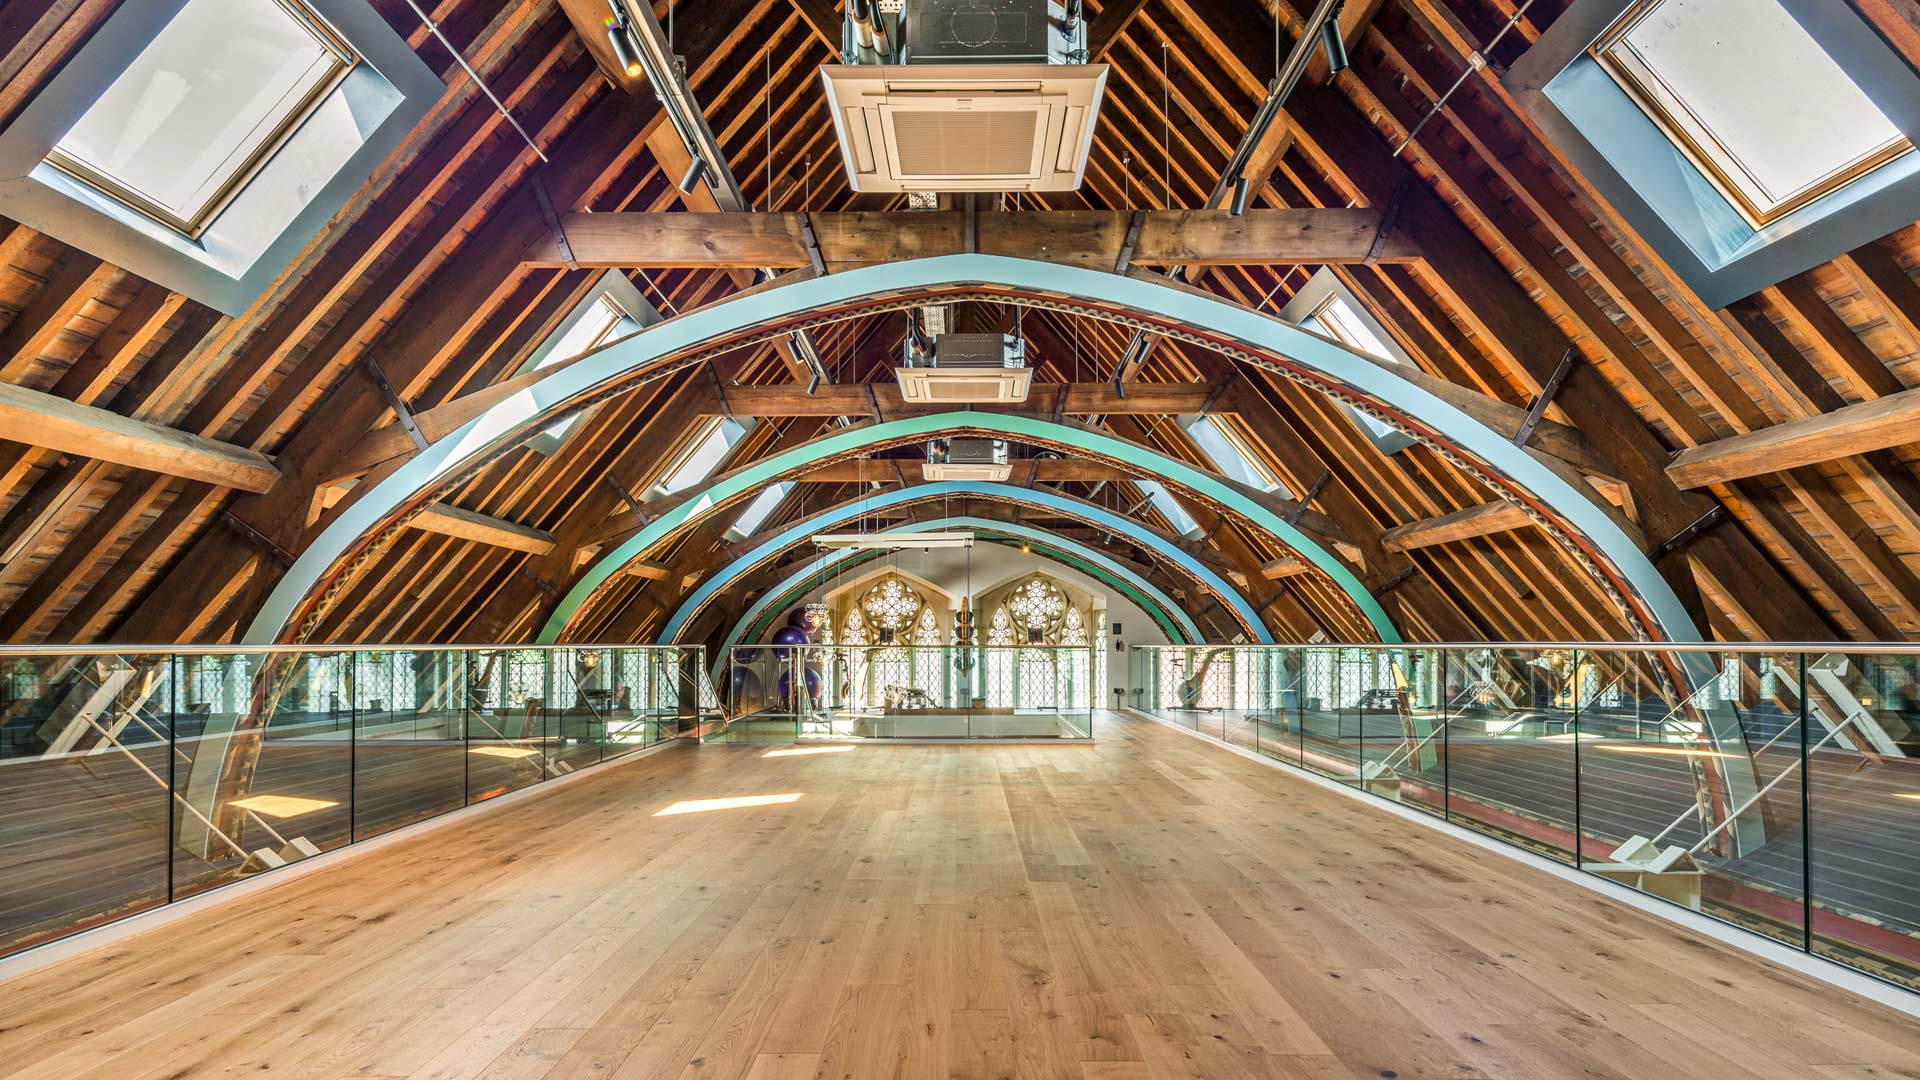 Original arched wooden church roof with skylights as feature of the upper level workout area